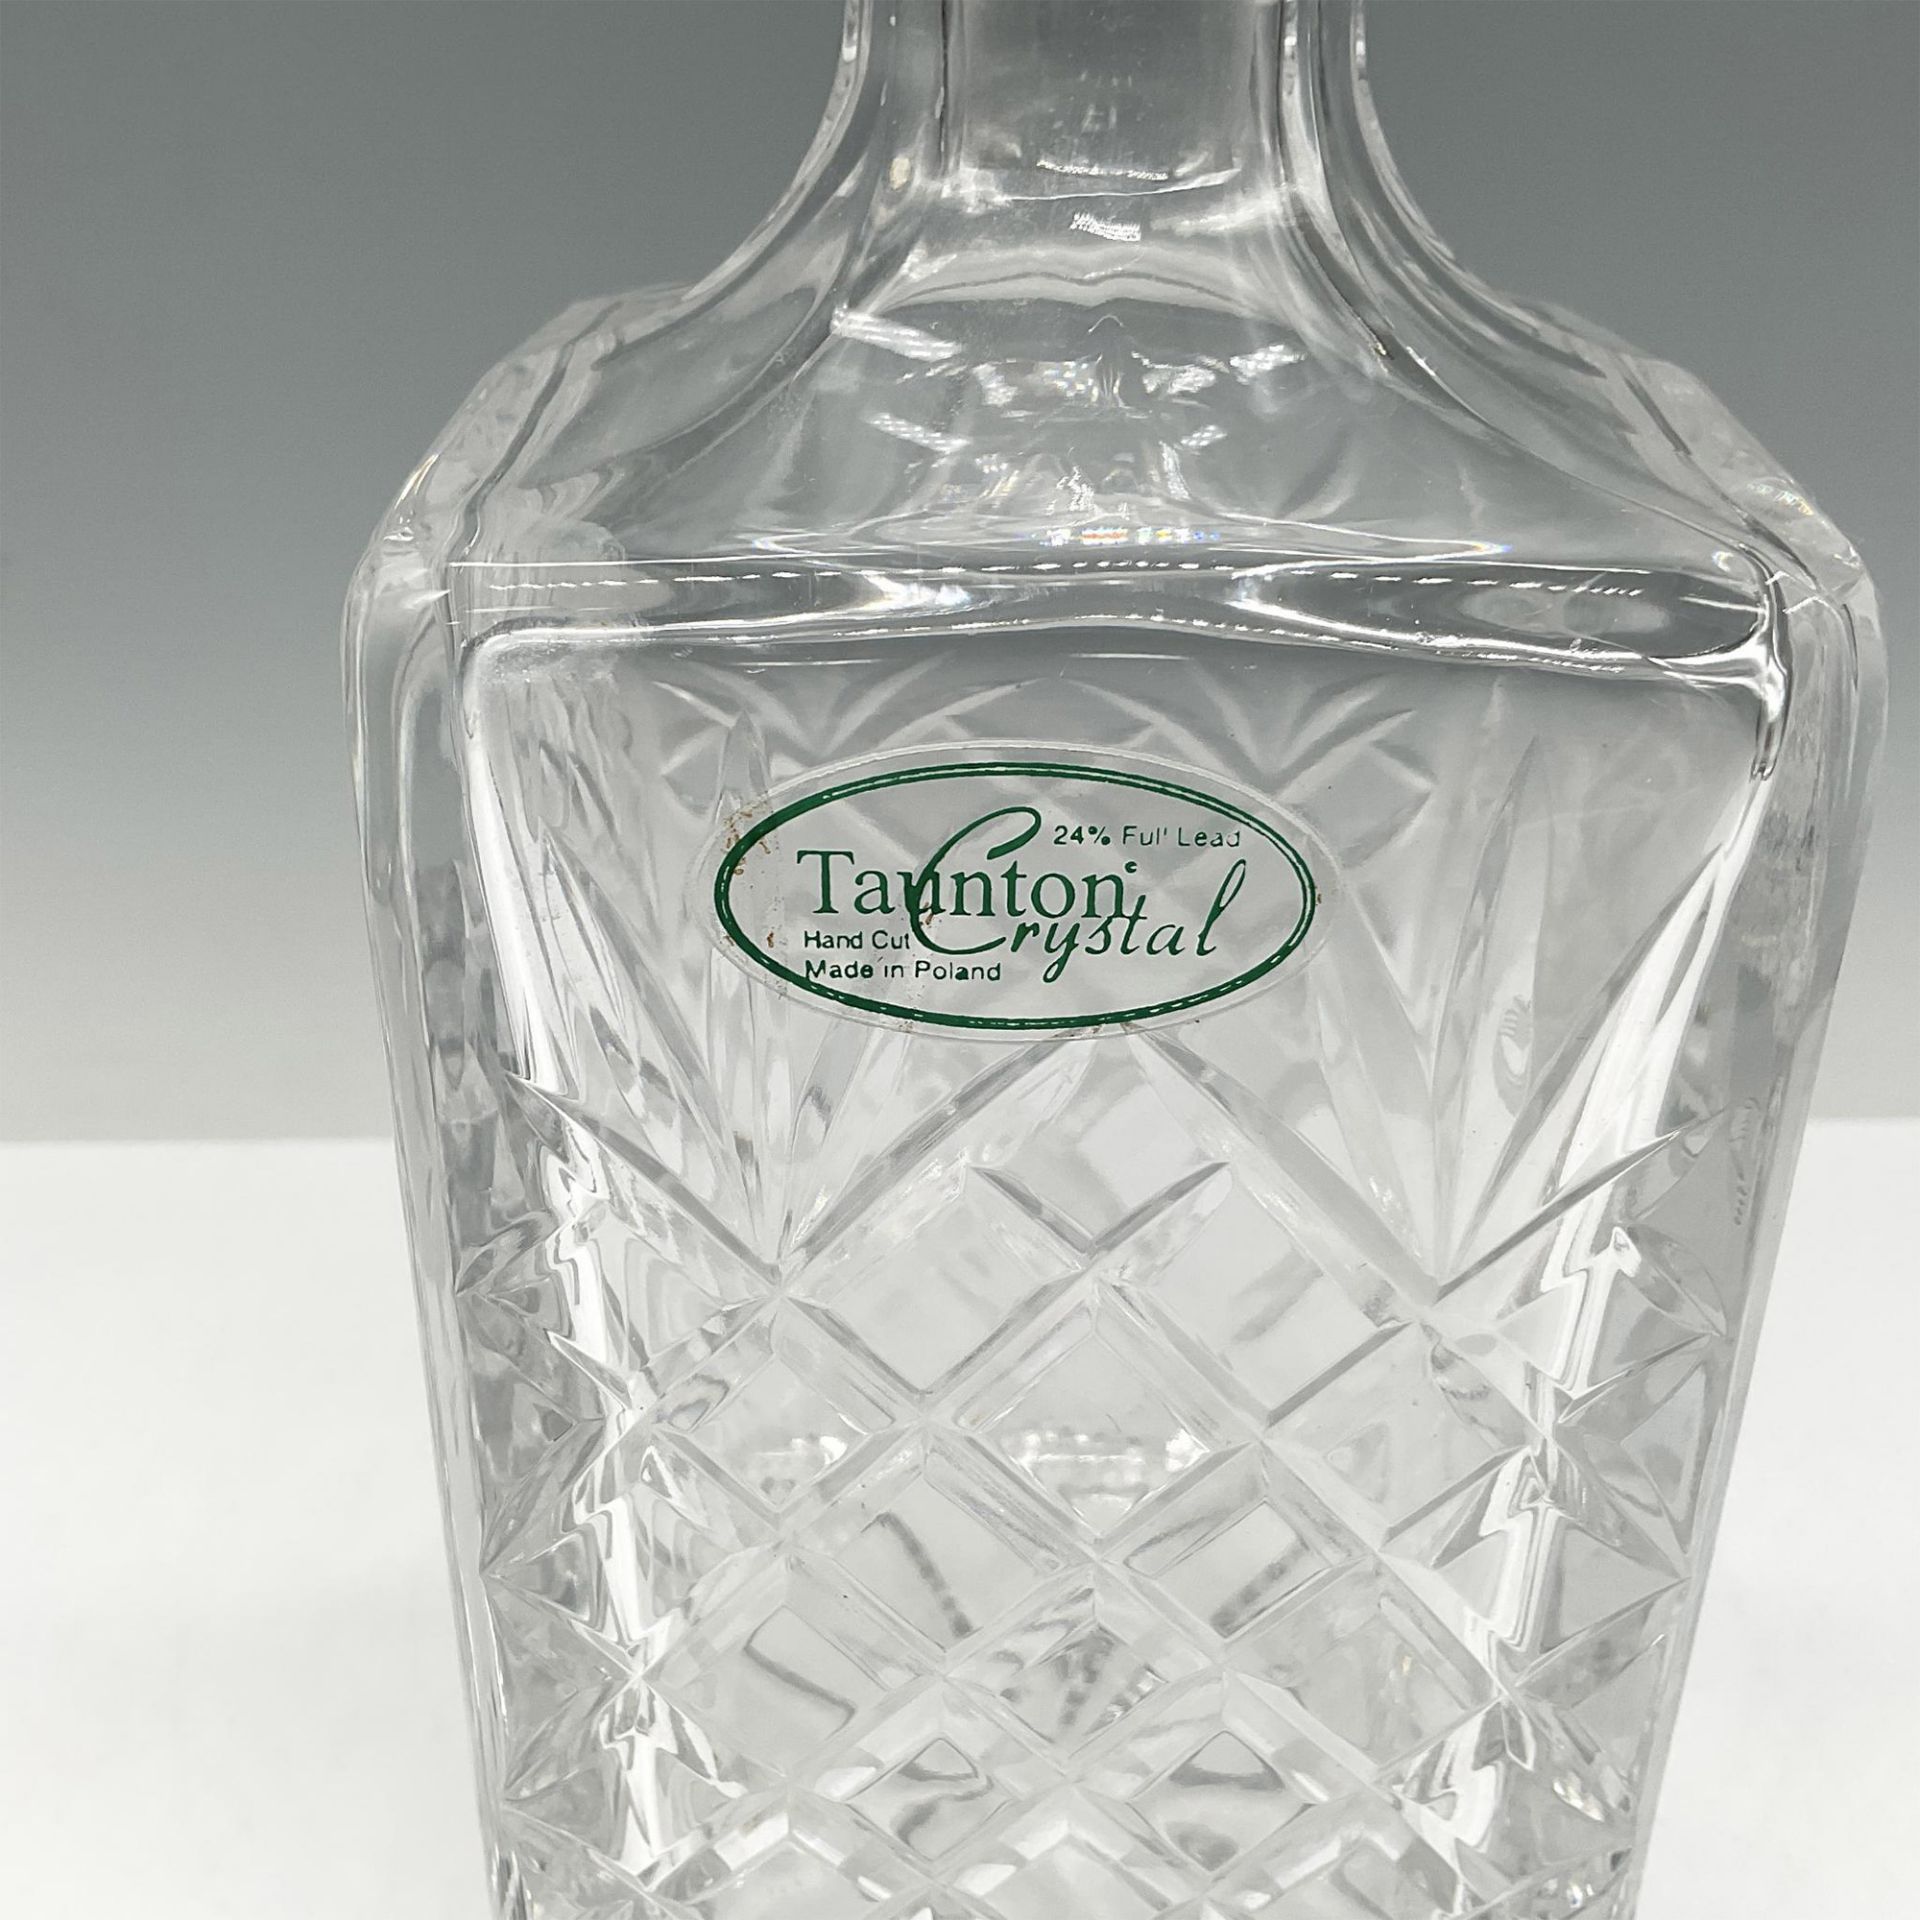 Taunton Crystal Decanter with Stopper - Image 3 of 3